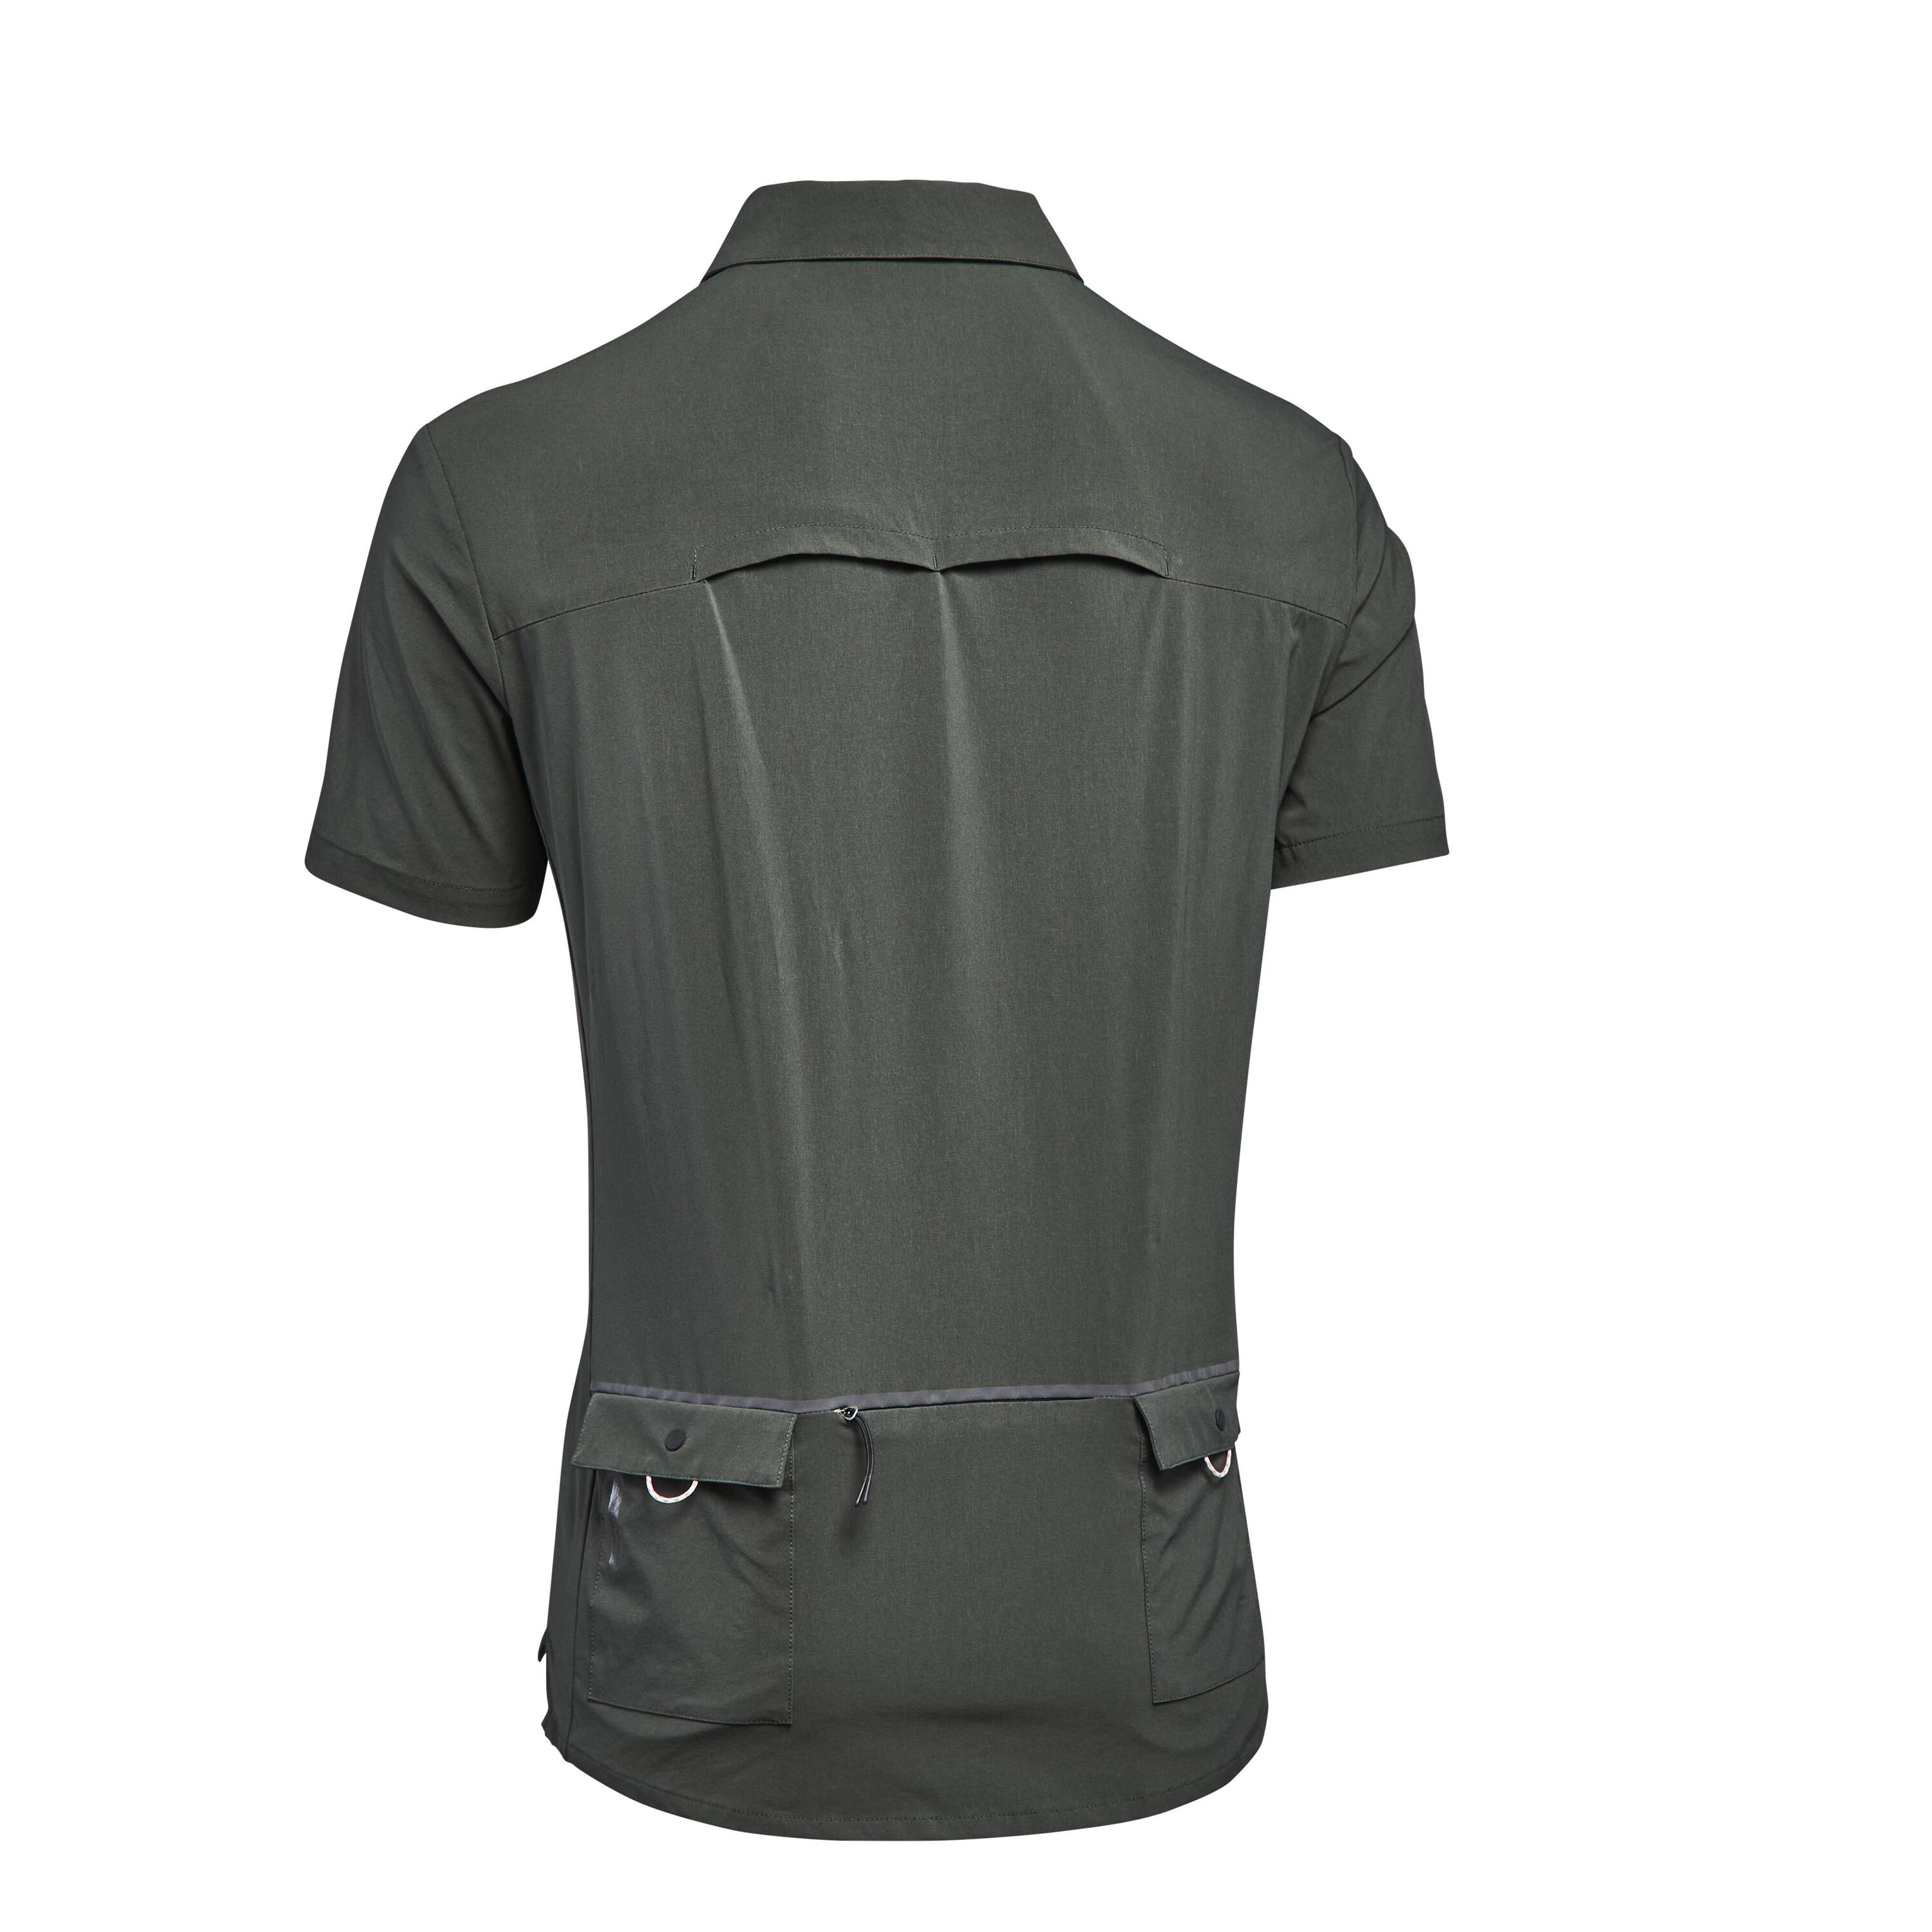 Gravel unisex cycling short-sleeved shirt, for travel and bikepacking 2/9